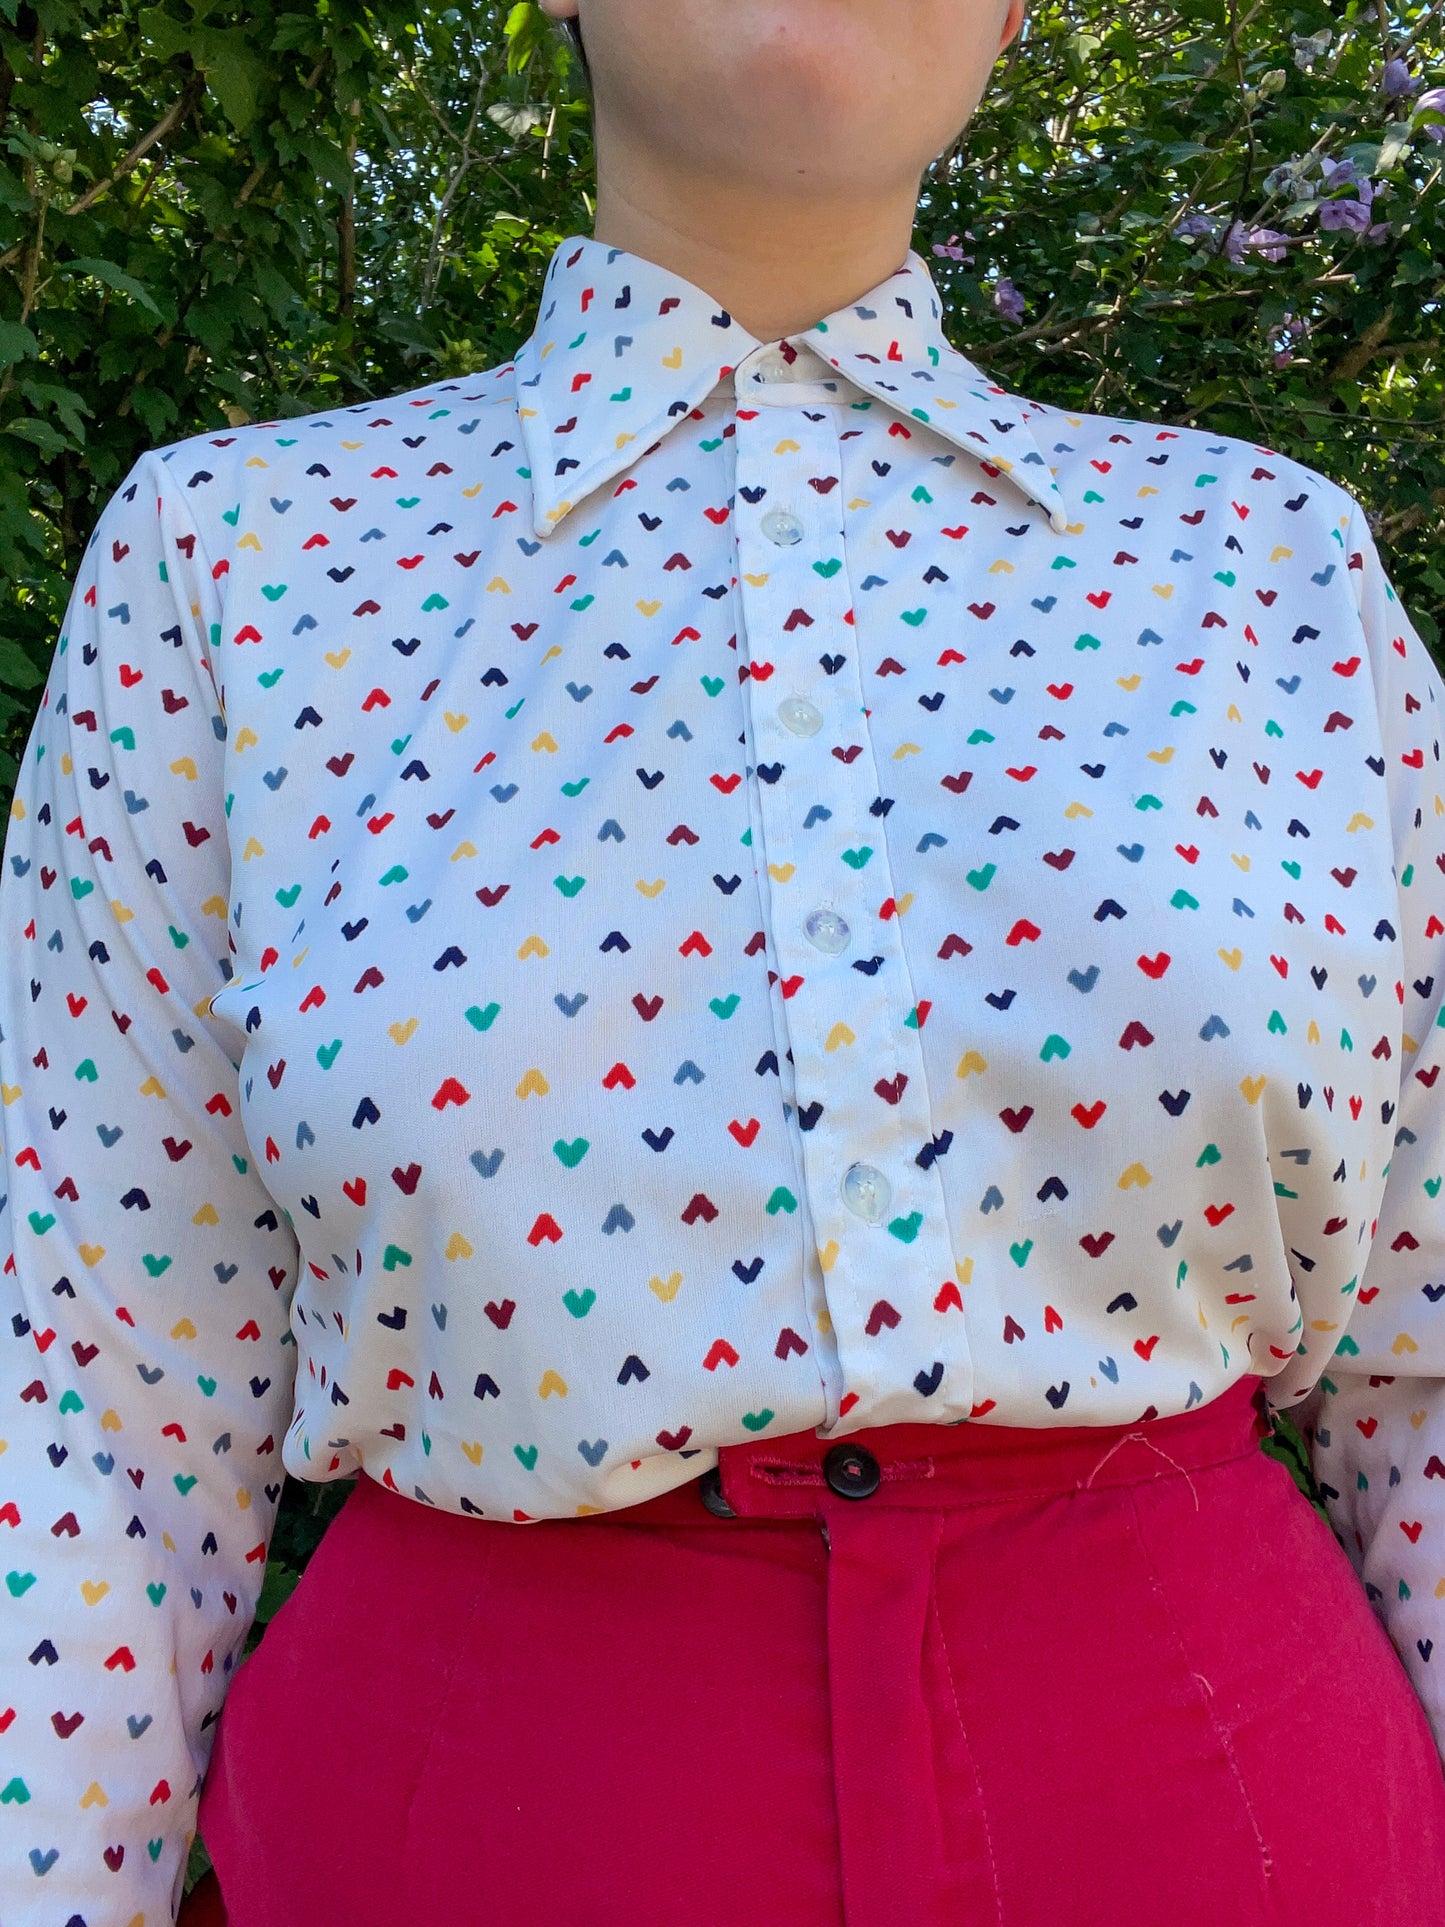 70s Rainbow Heart Print Button Up Top (L)